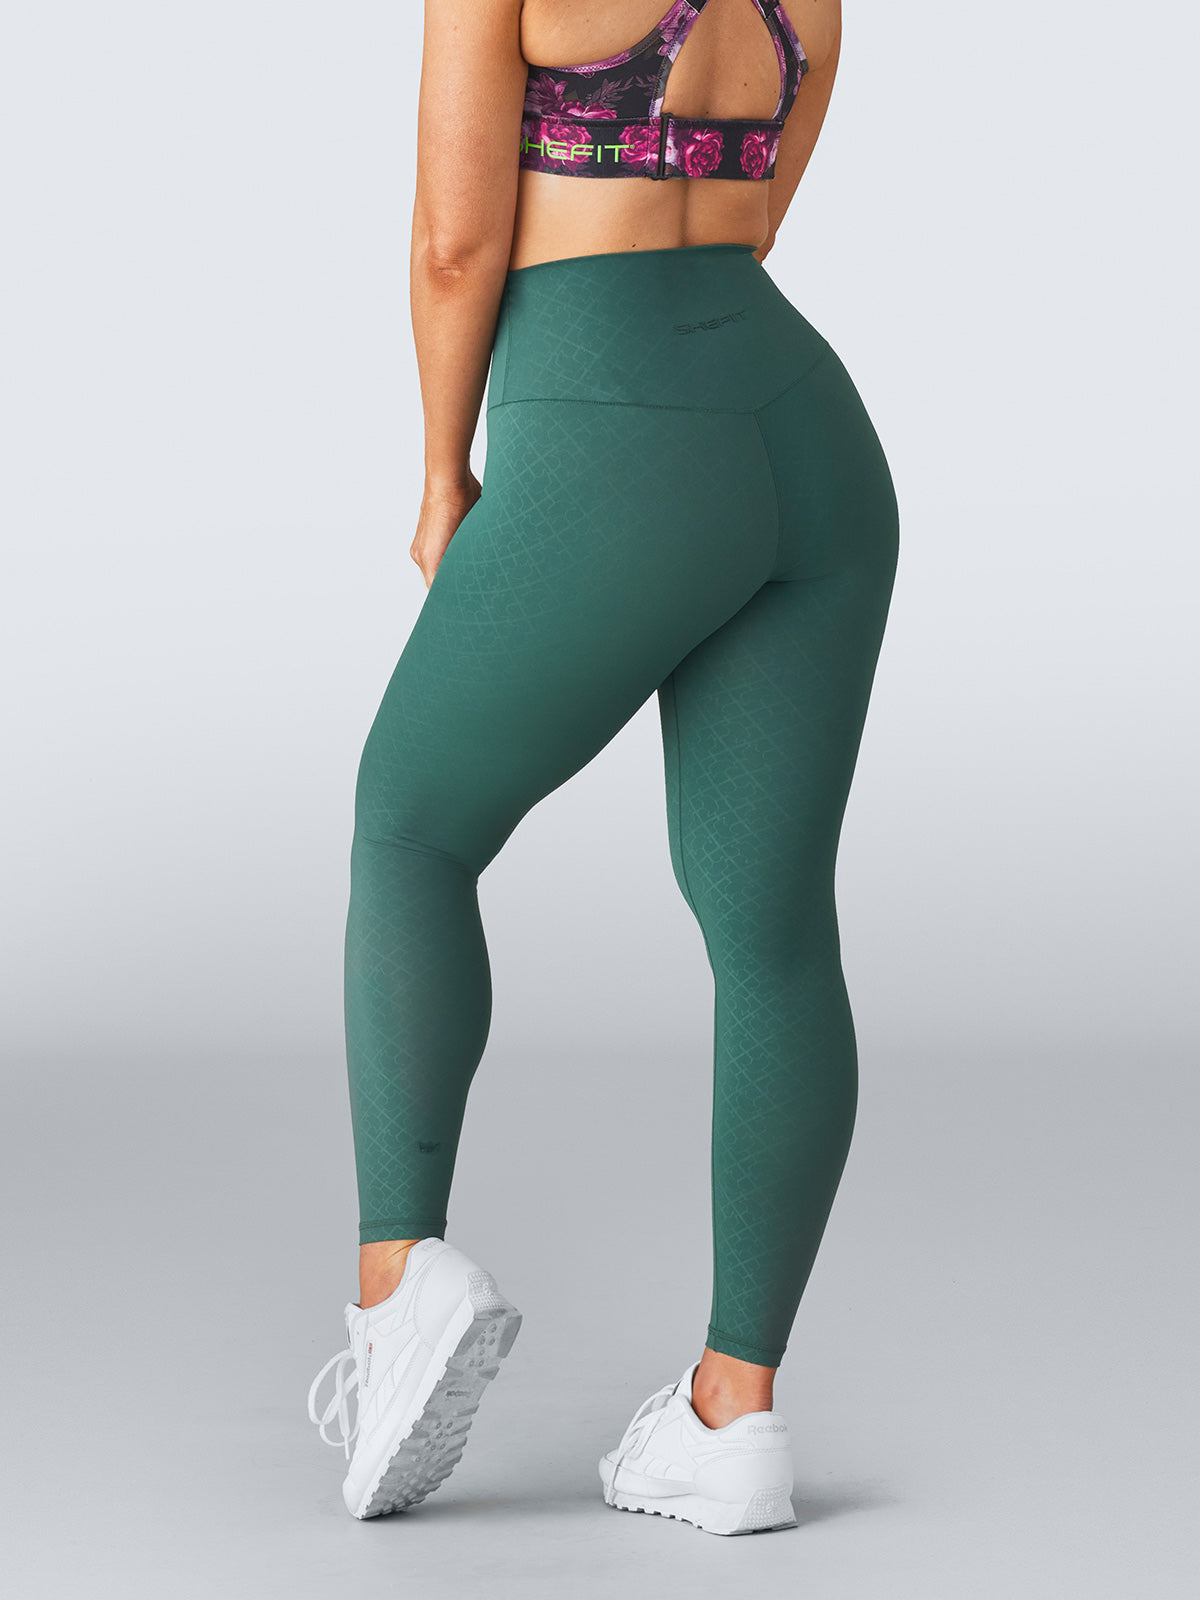 SHEFIT - The wait is finally over! We now have Boss'd Leggings